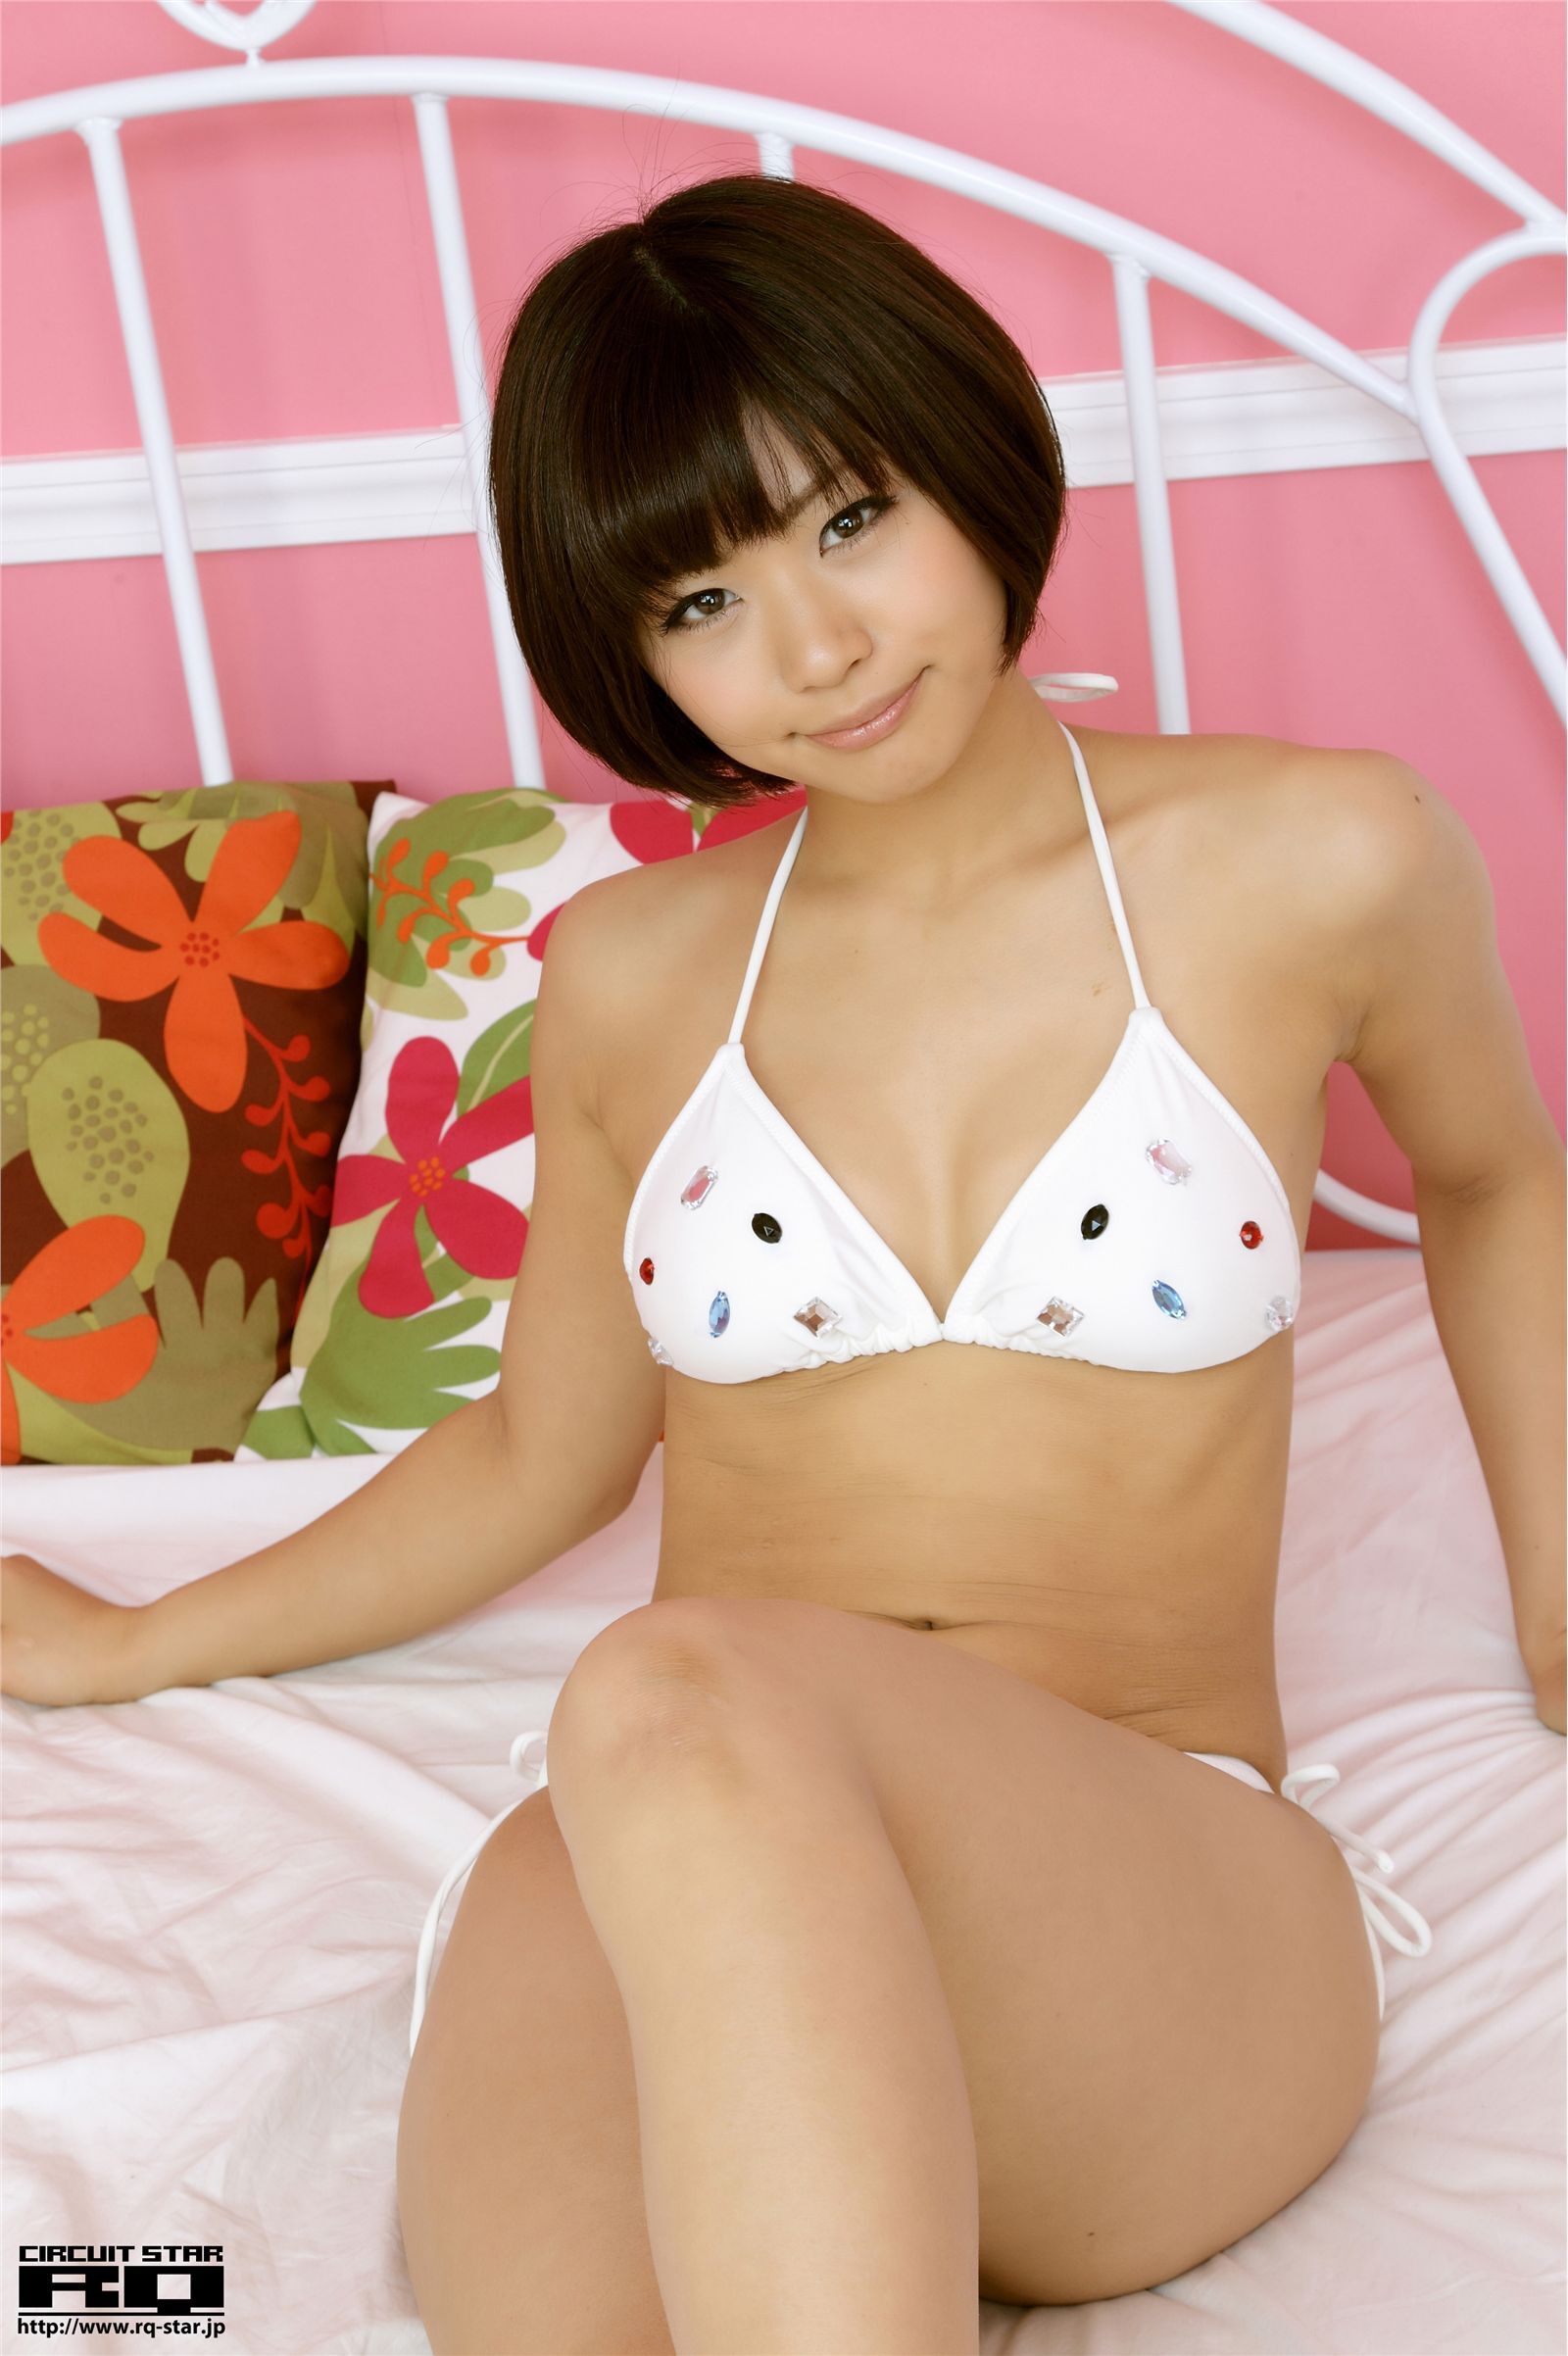 An Zhitong [rq-star] 2012.03.02no.00609 high definition photo of Japanese beauty model